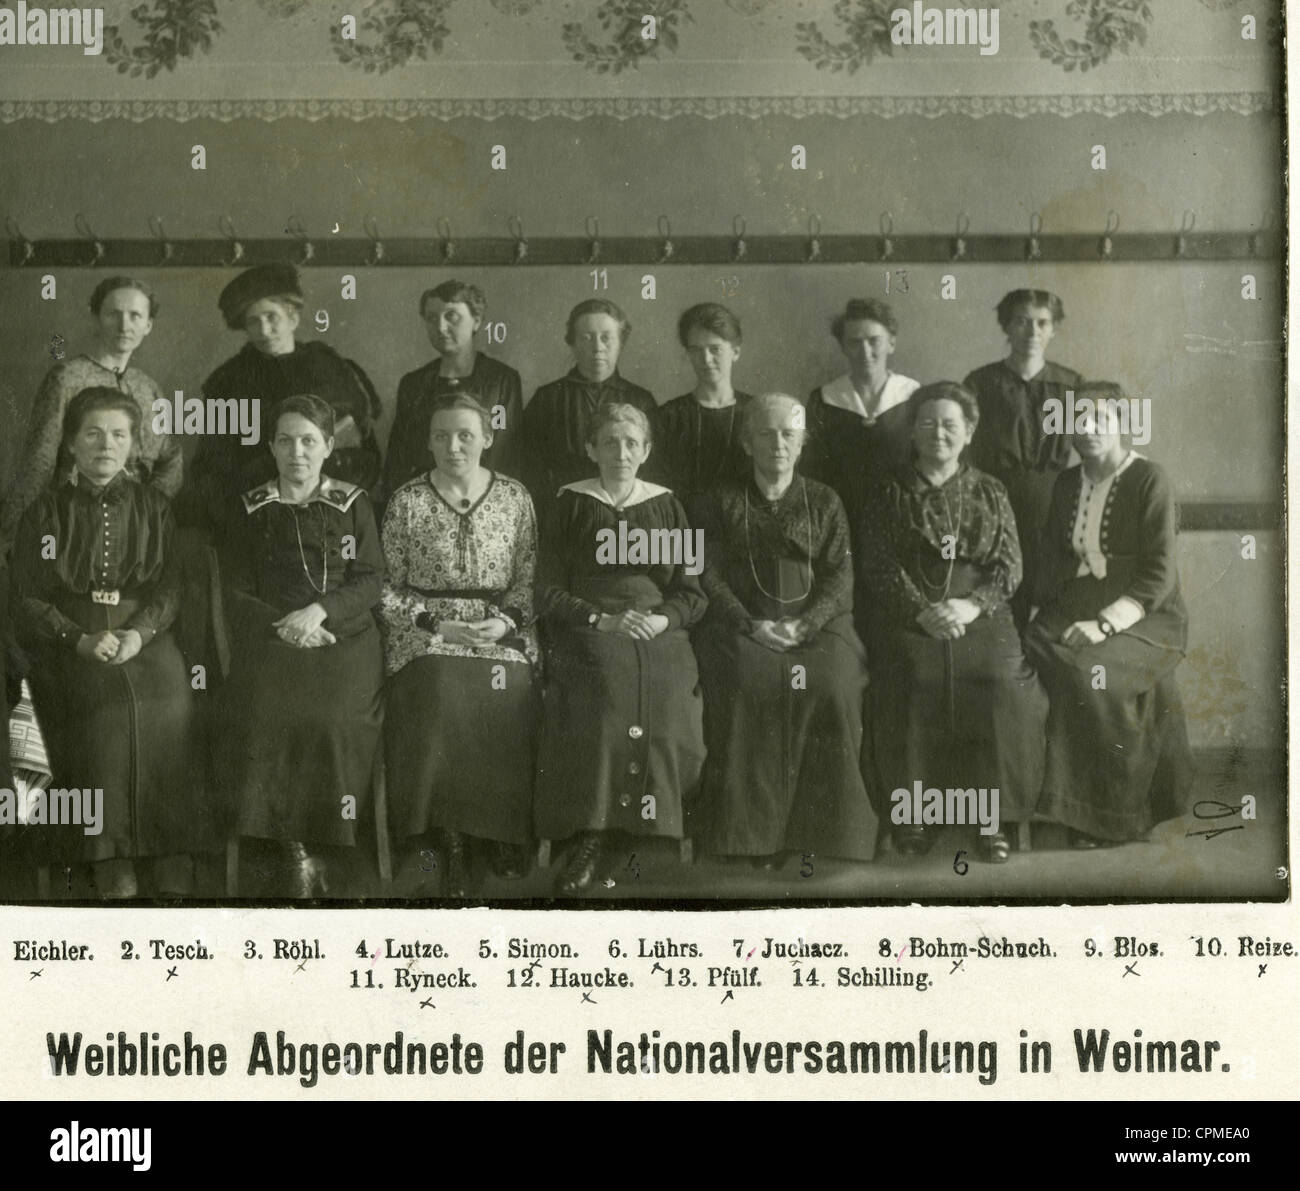 Members of the National Assembly in Weimar, 1919 Stock Photo